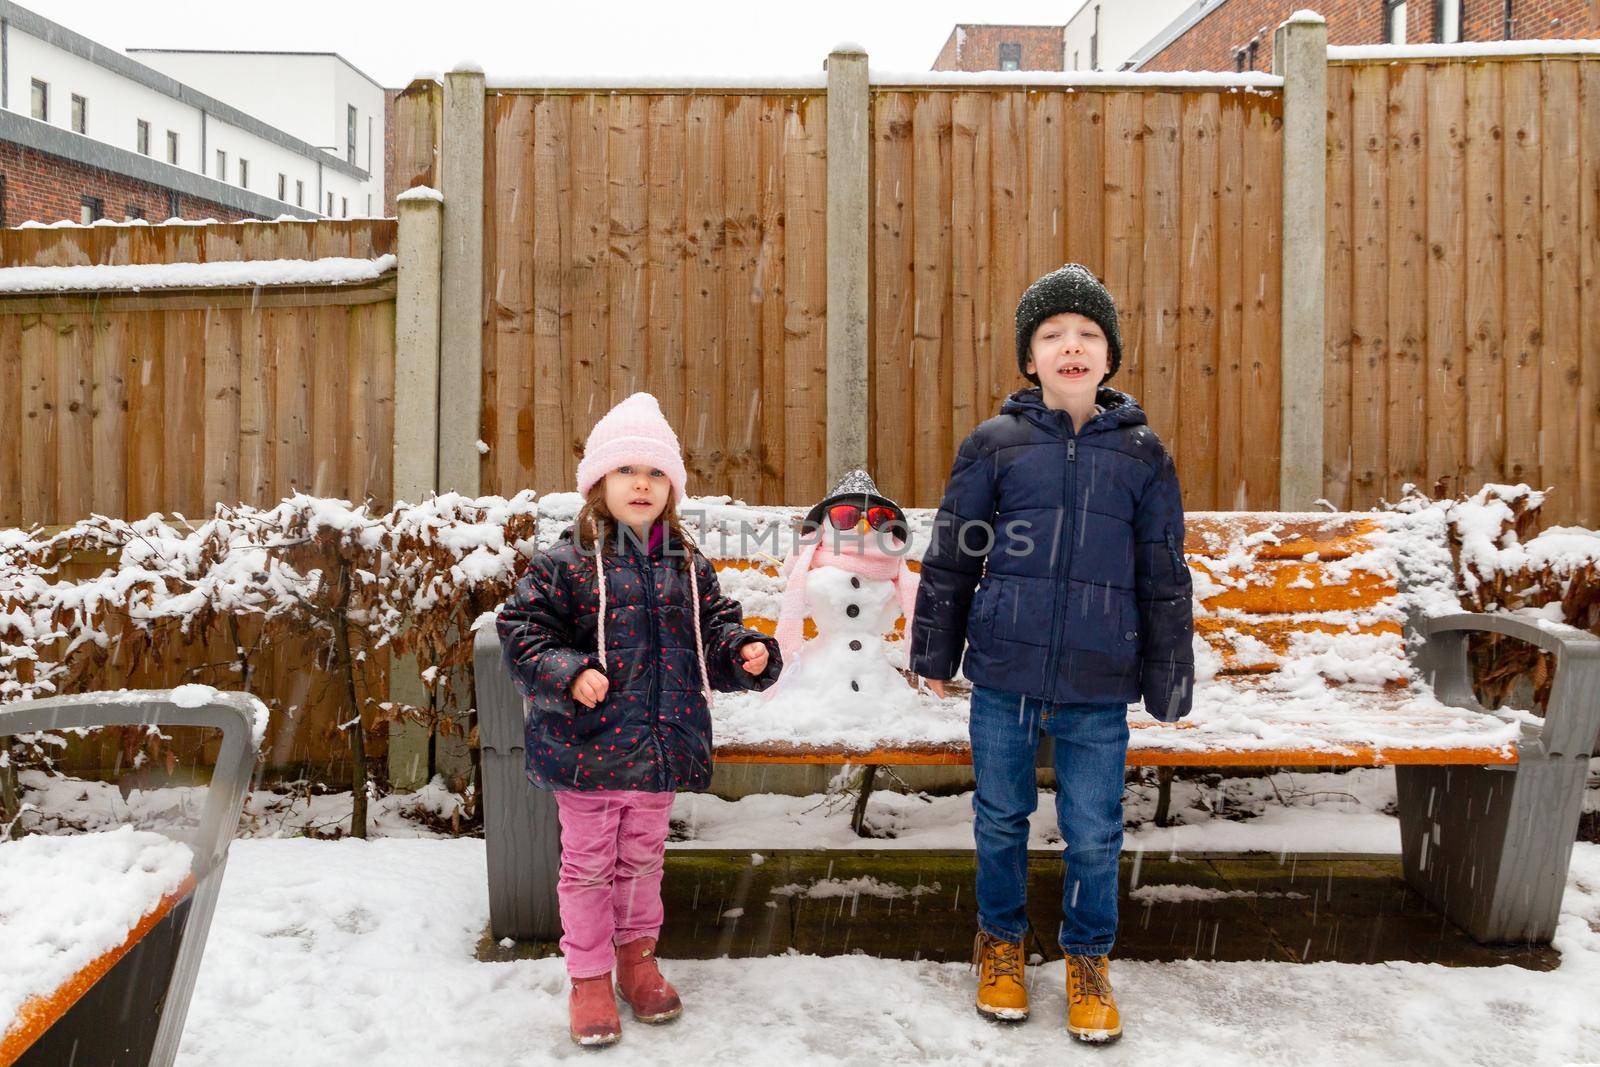 A cute blue-eyed, redhead boy and a cute, blue-eyed, brown-haired girl standing in the snow by a snowman